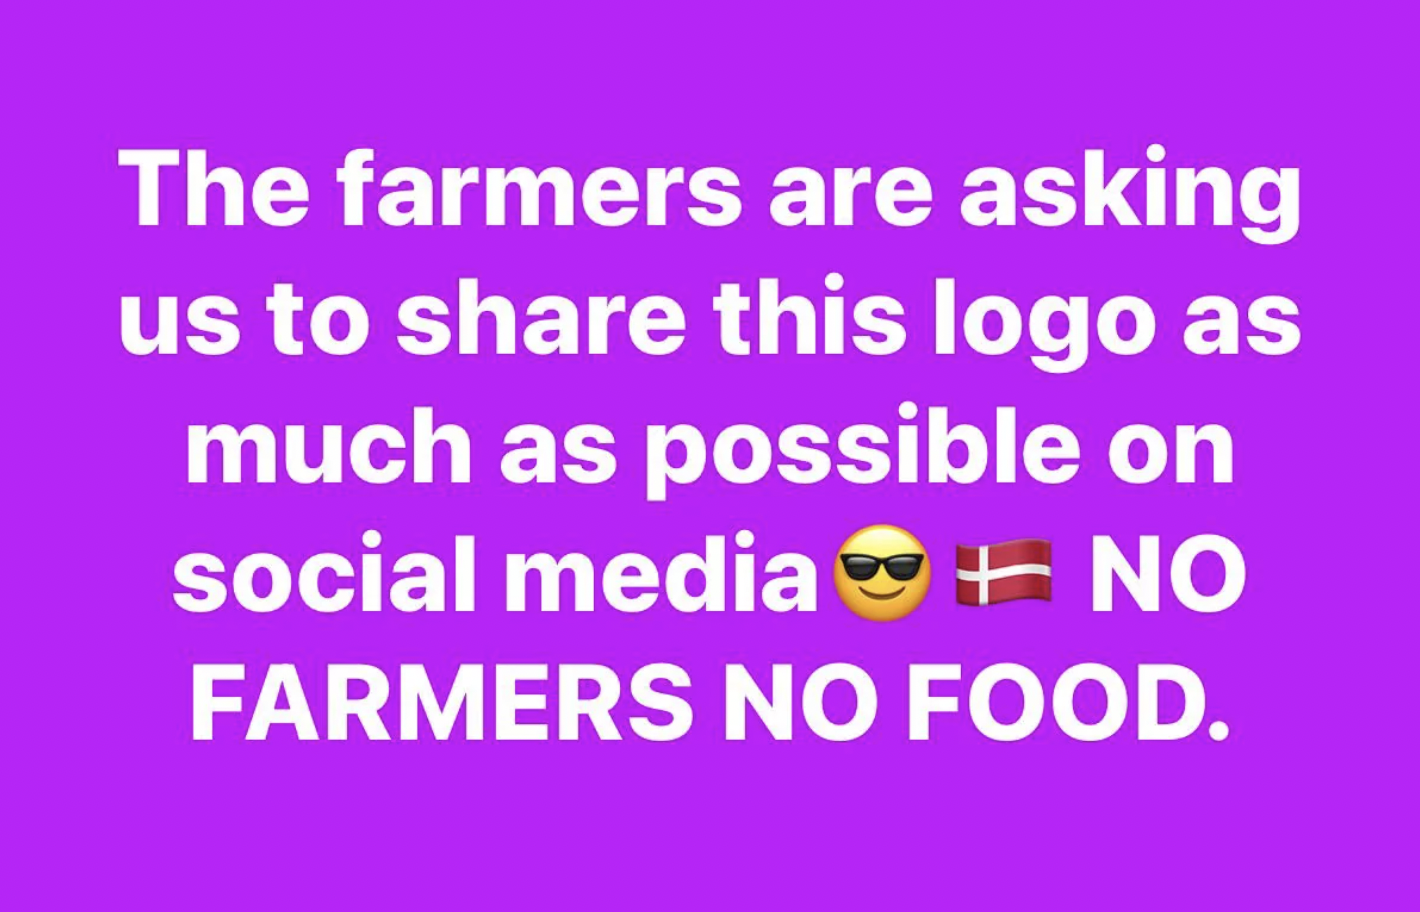 lavender - The farmers are asking us to this logo as much as possible on social media No Farmers No Food.